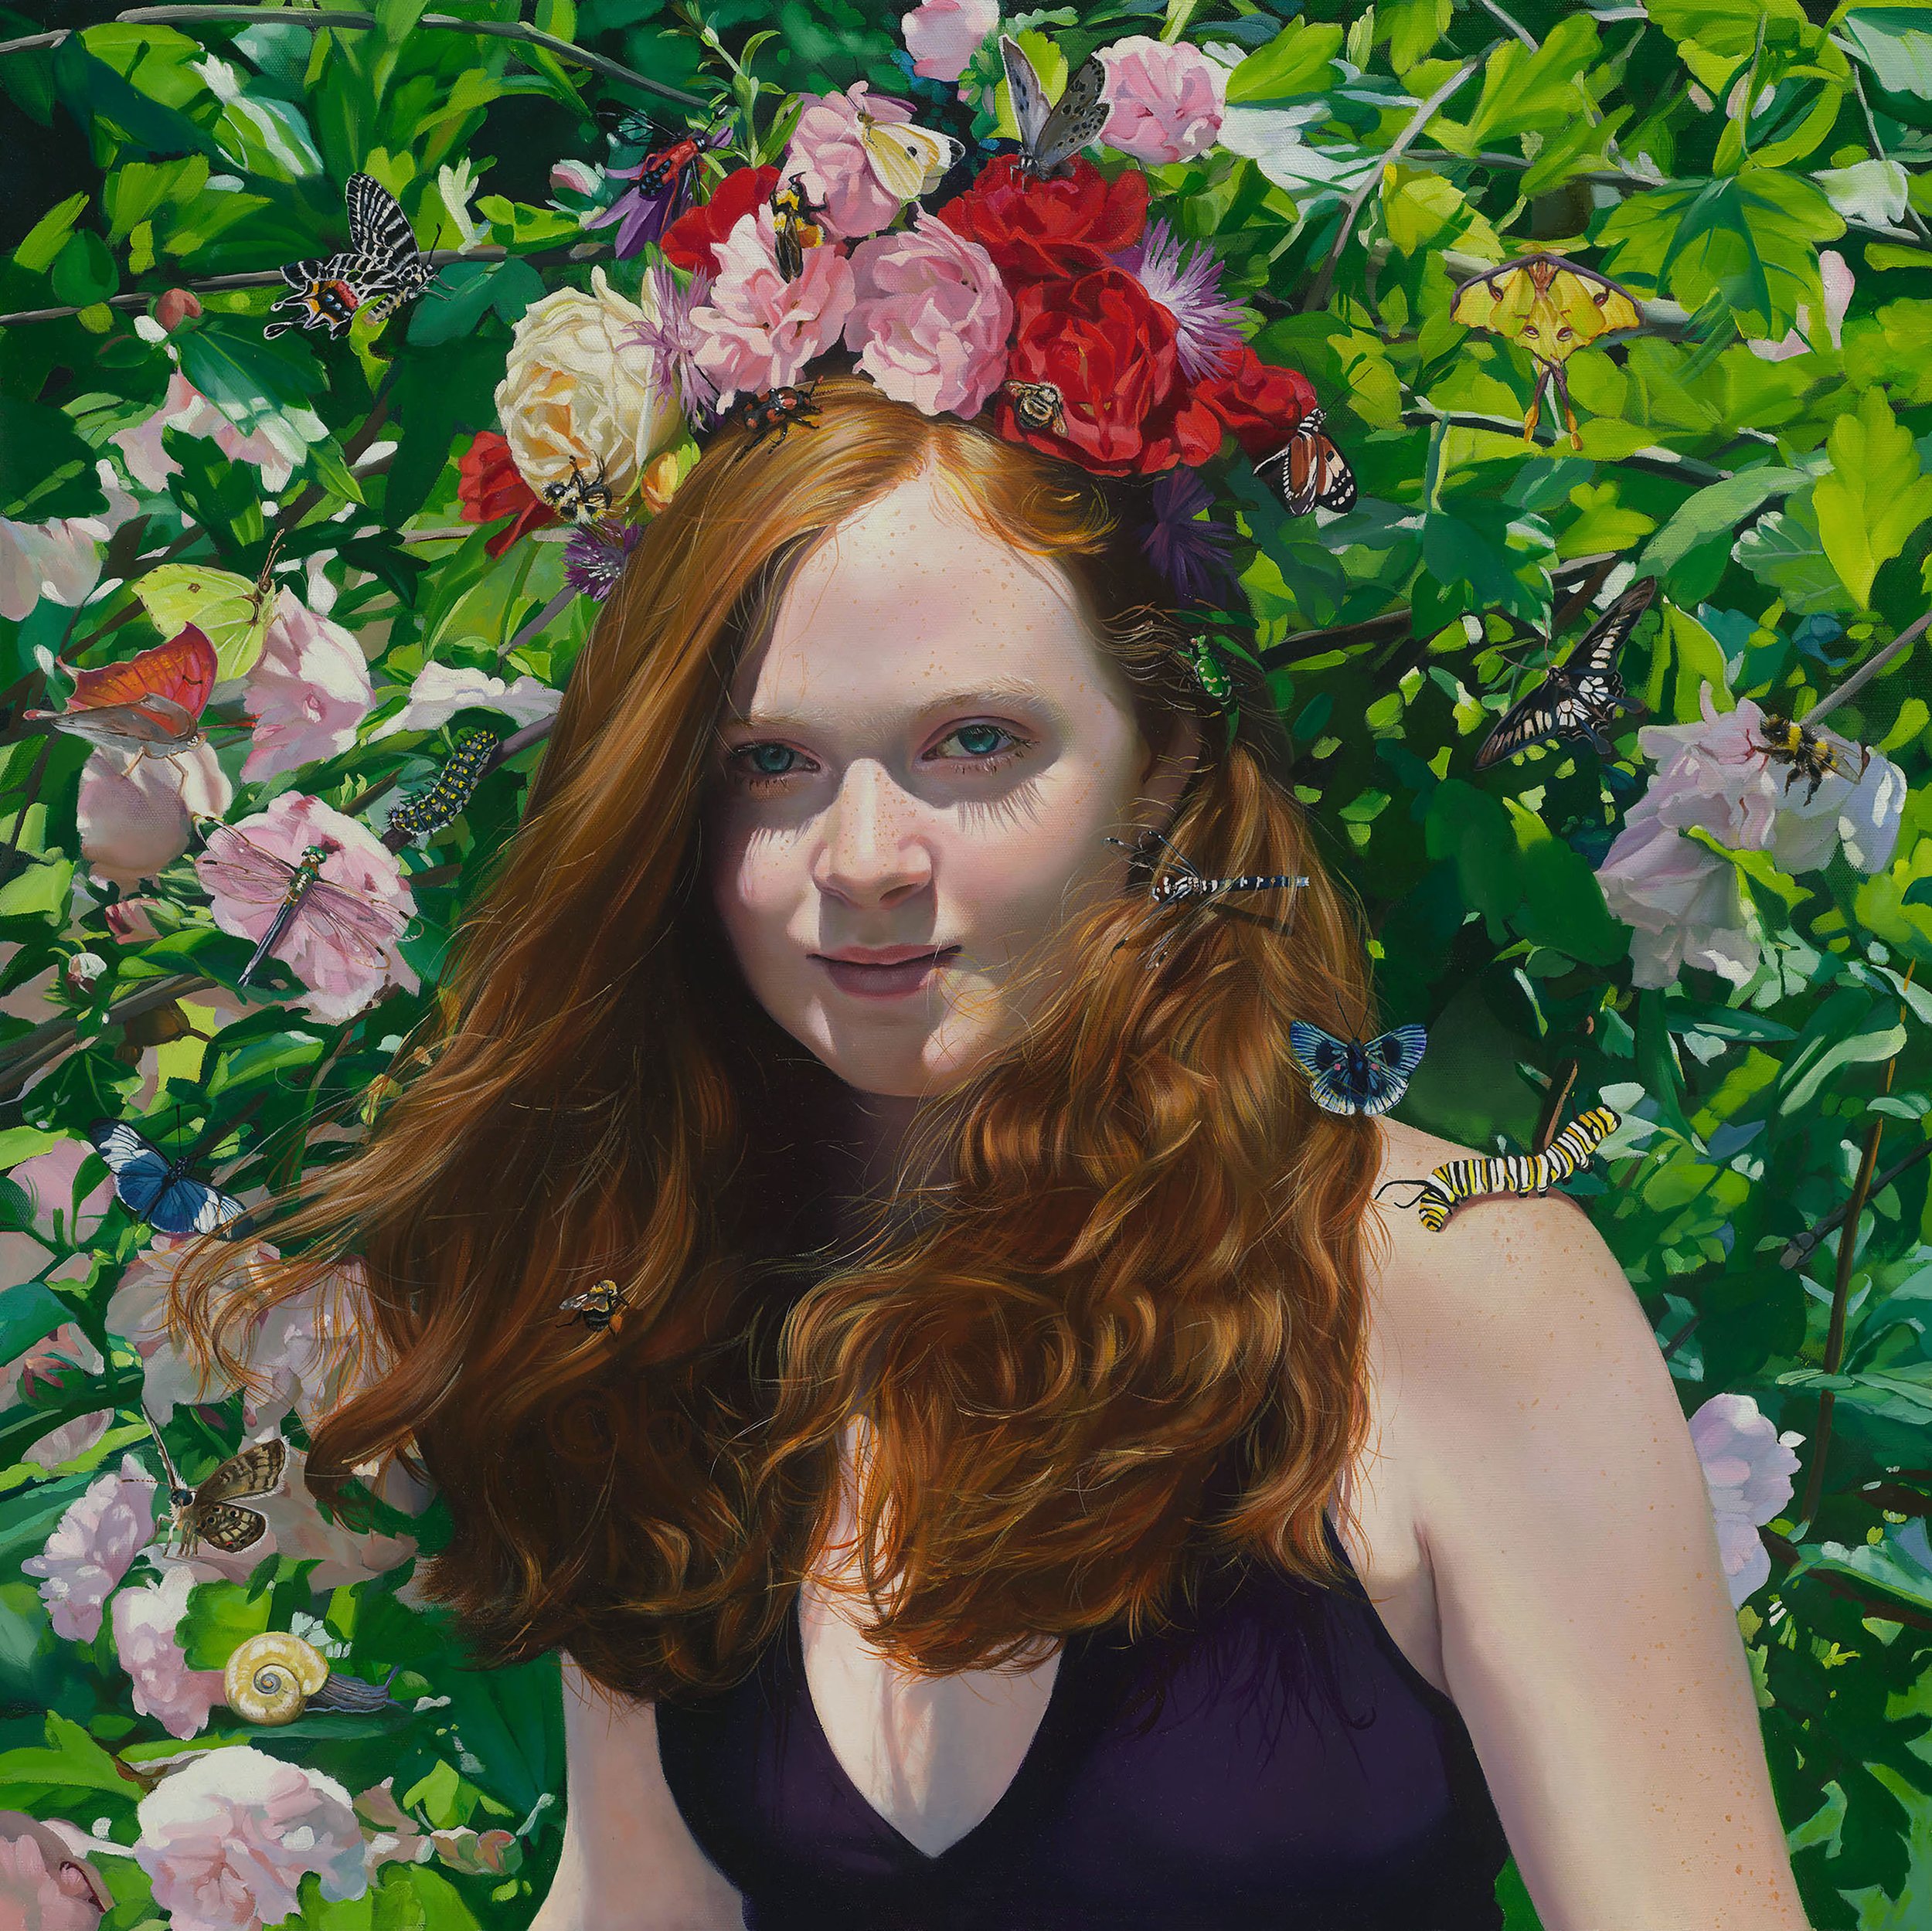 When she wears flowers in her hair, 30 x 30 ", oil on canvas